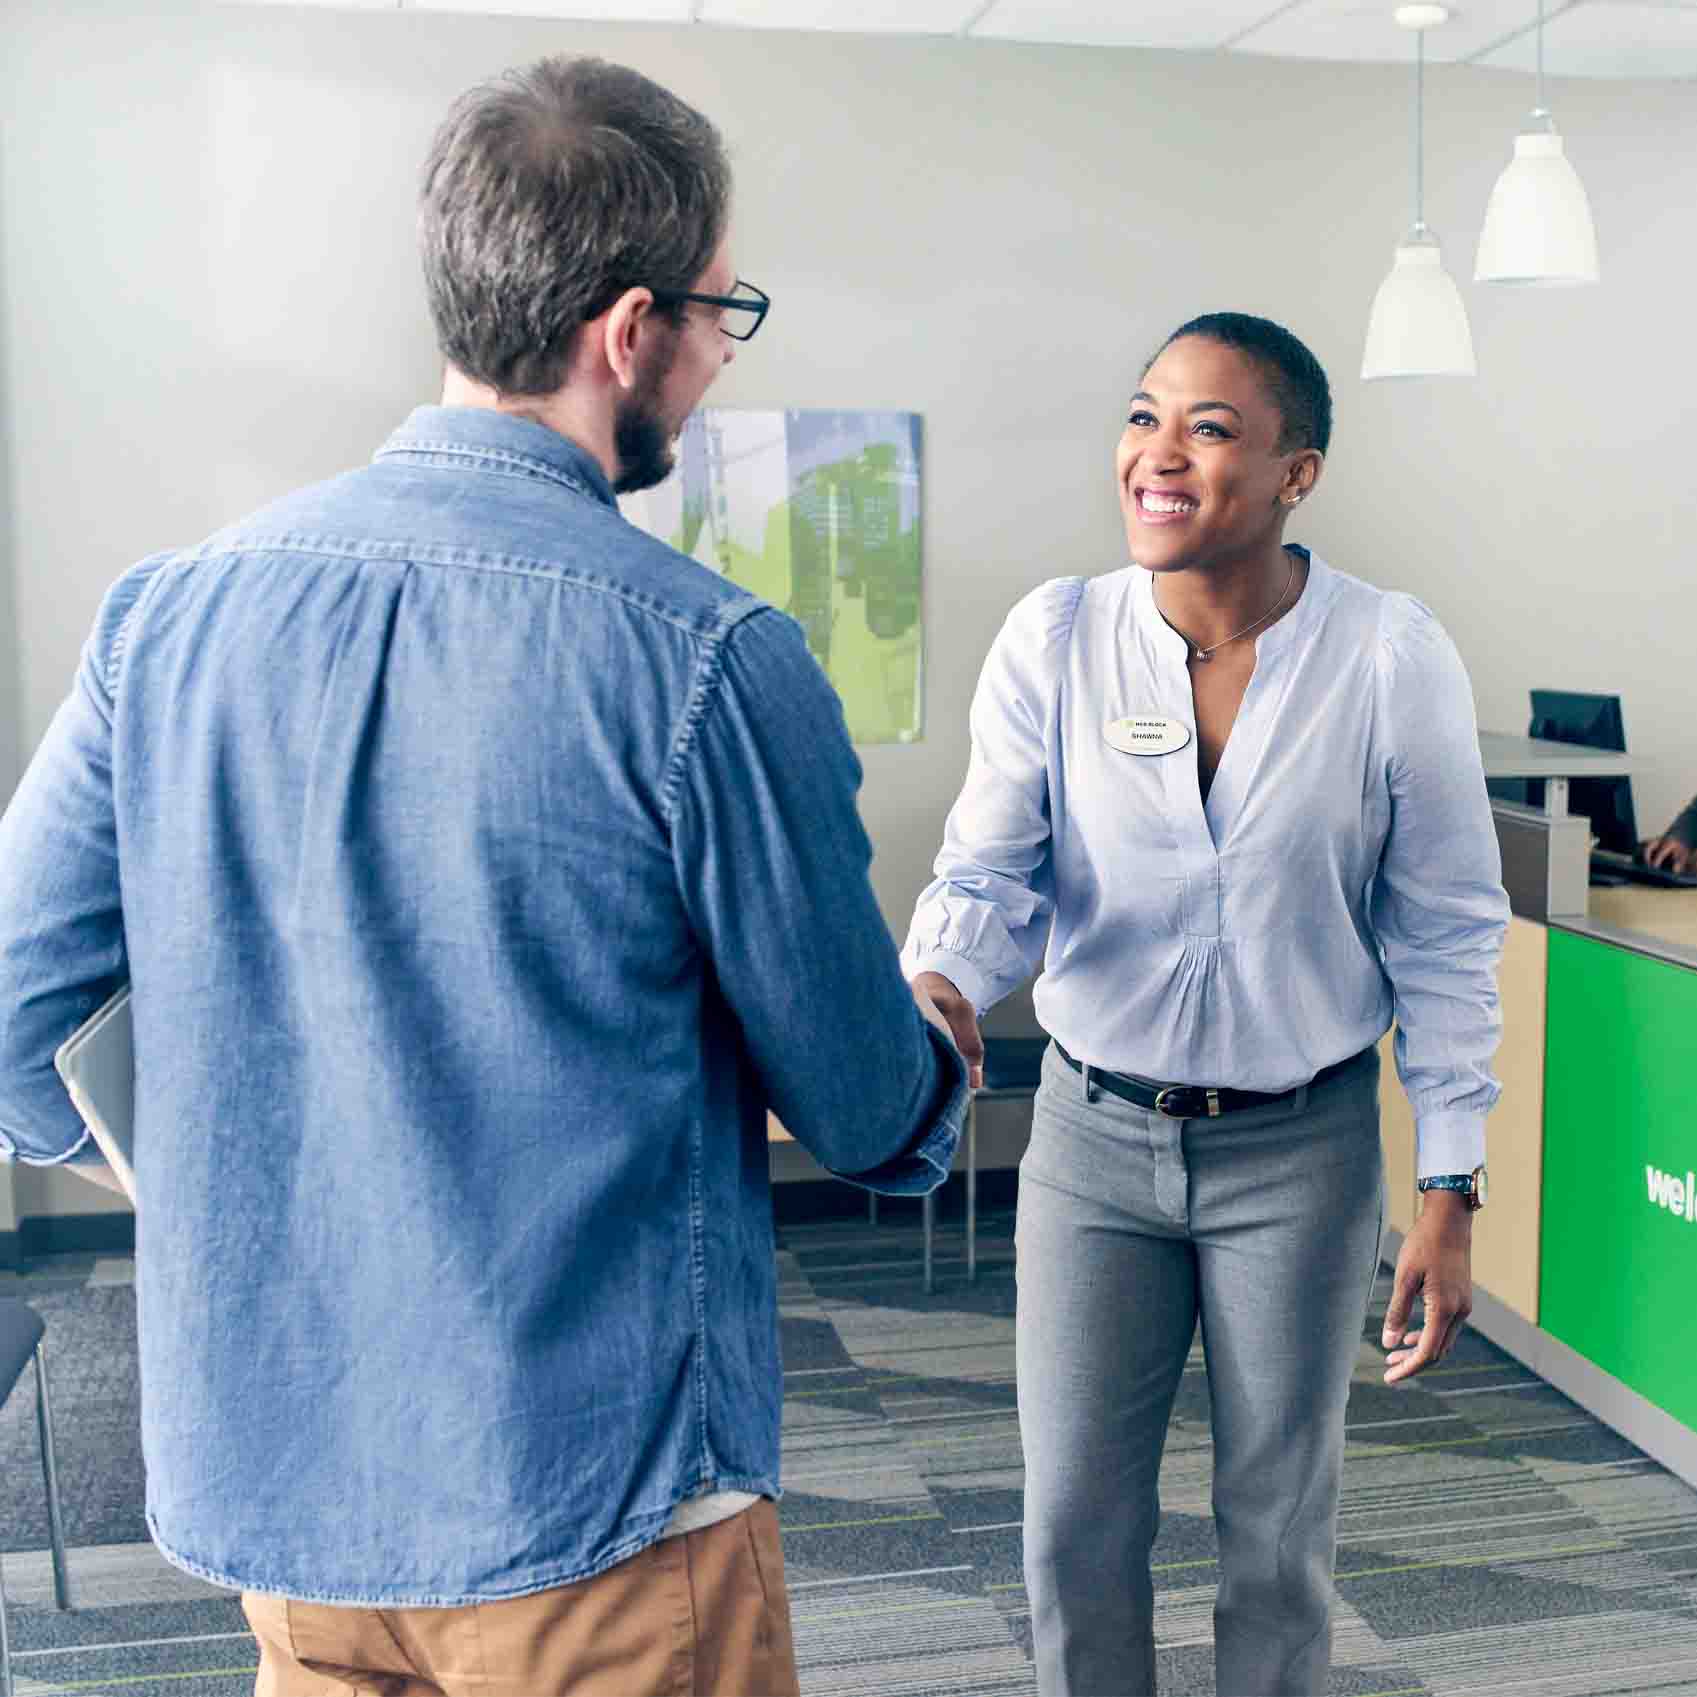 tax advisor greeting a client at the H&R Block office